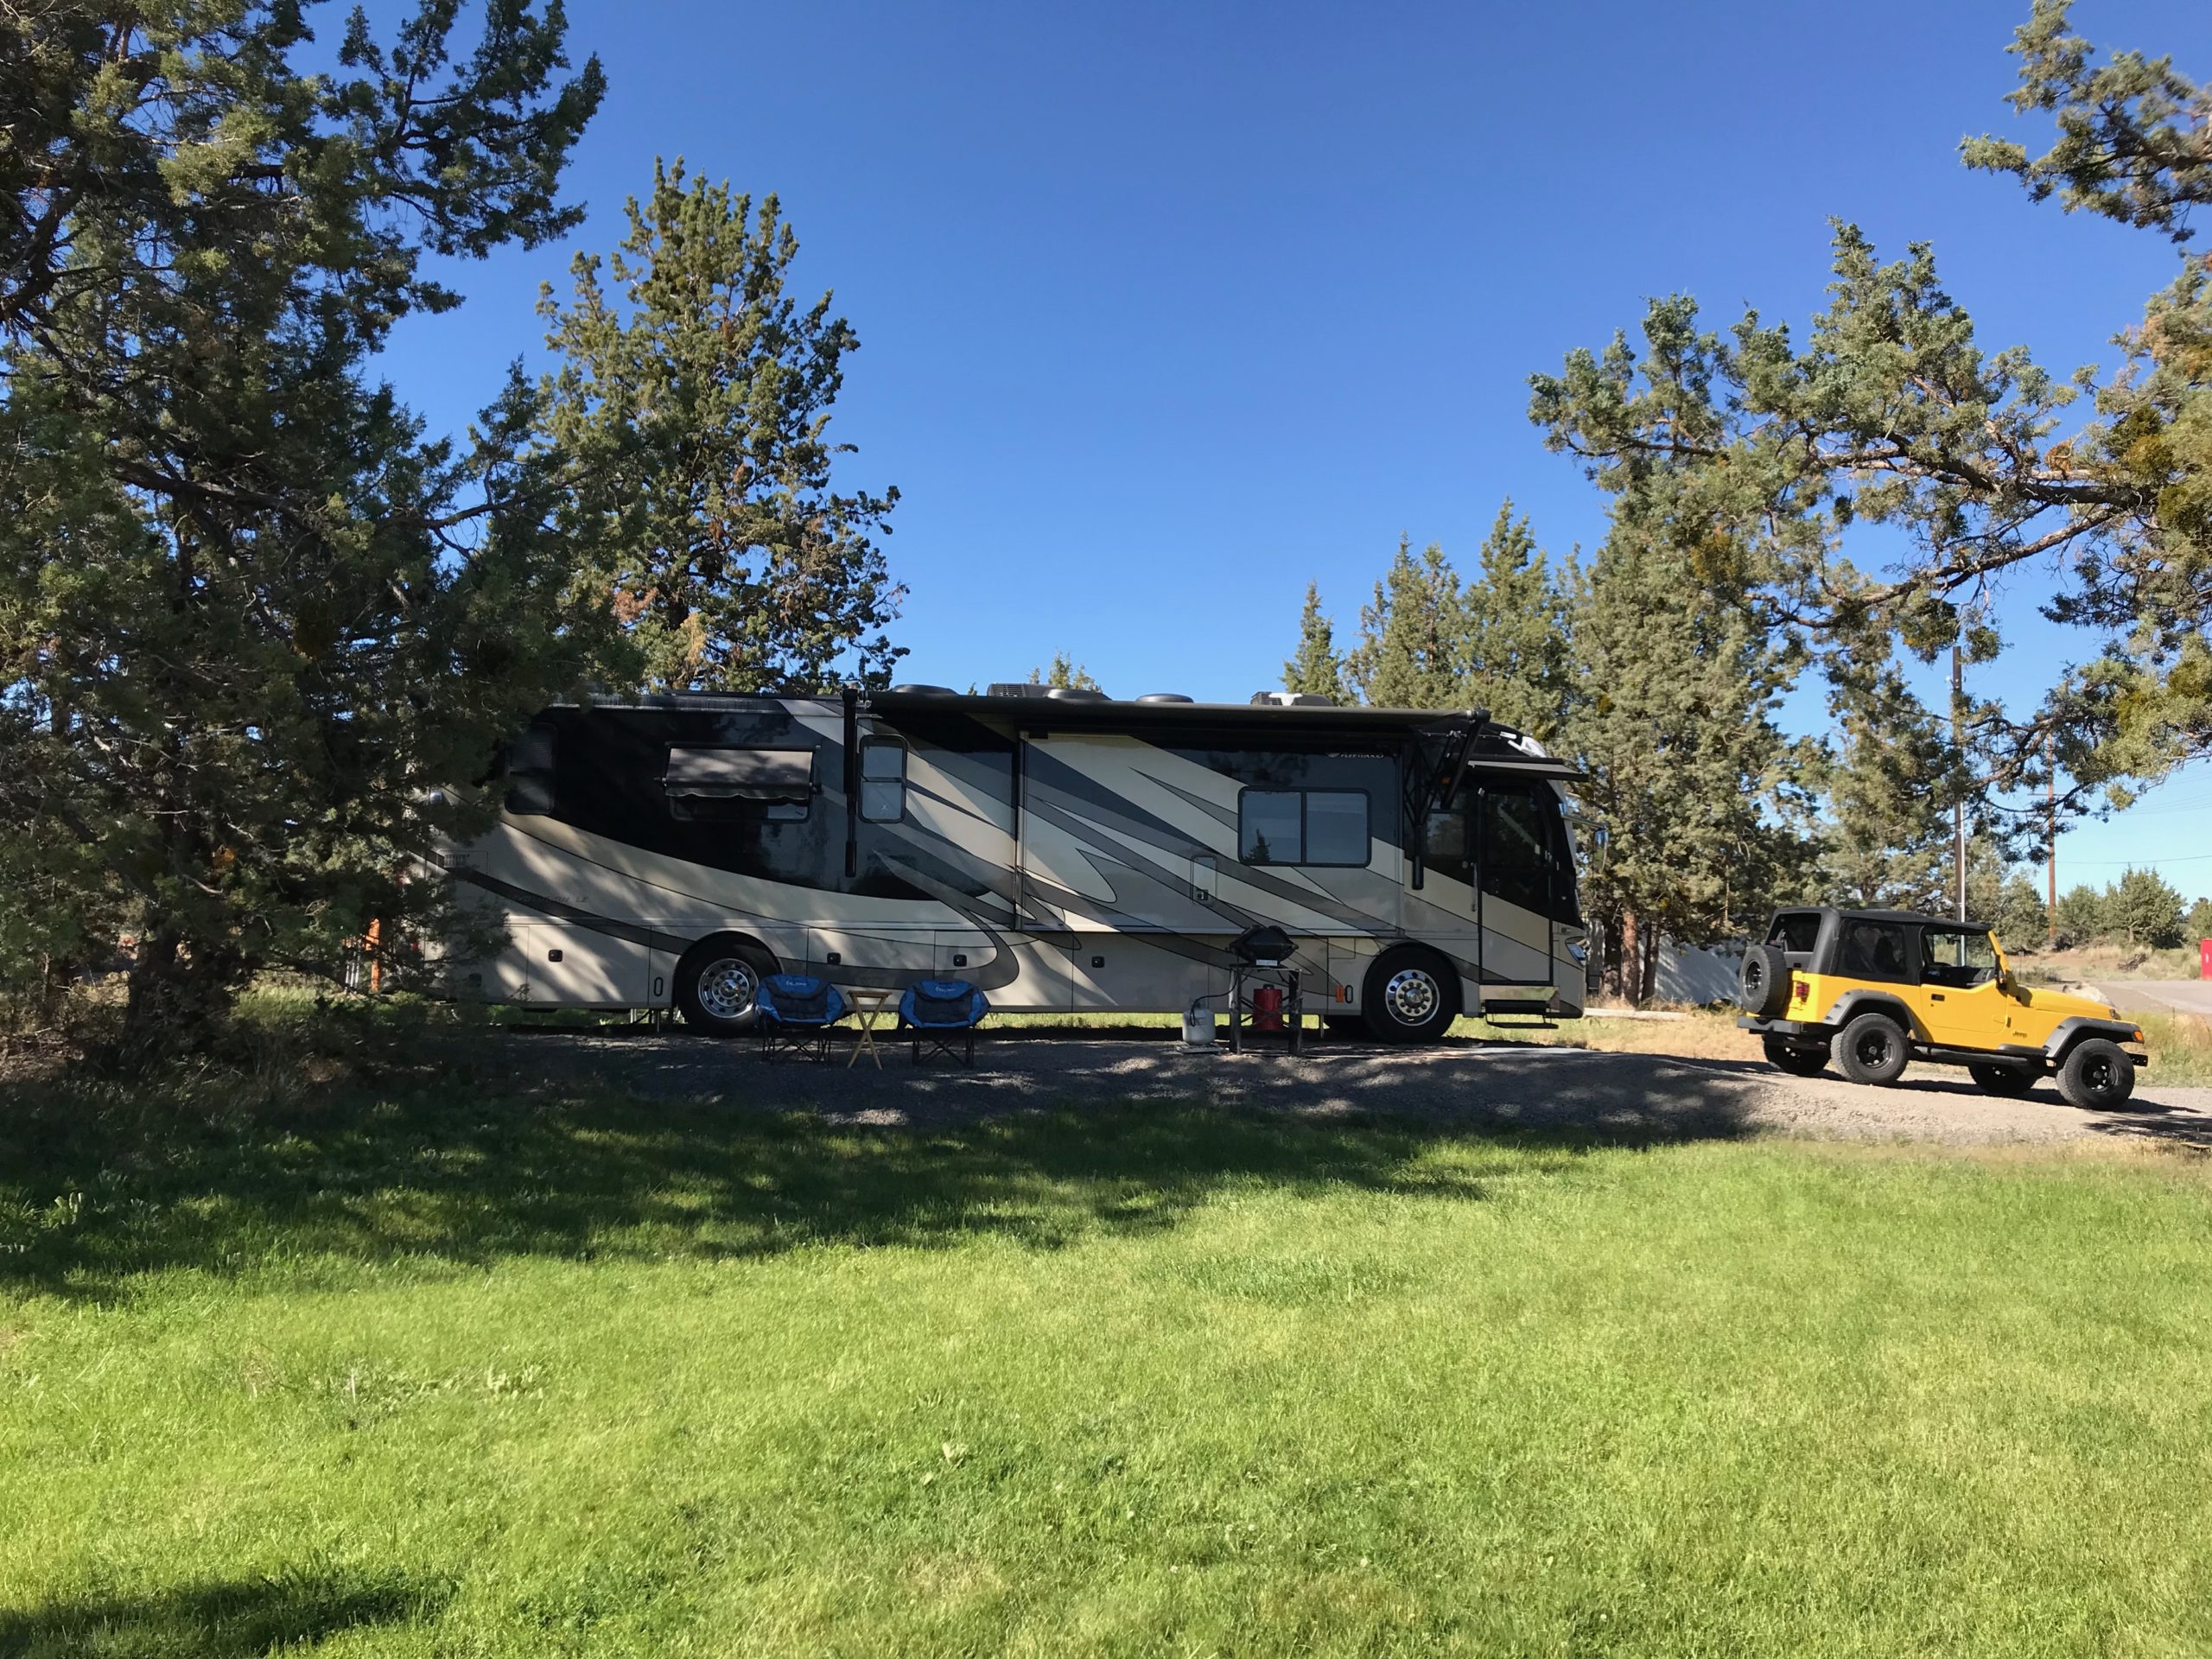 Finding RV Parks While On the Road